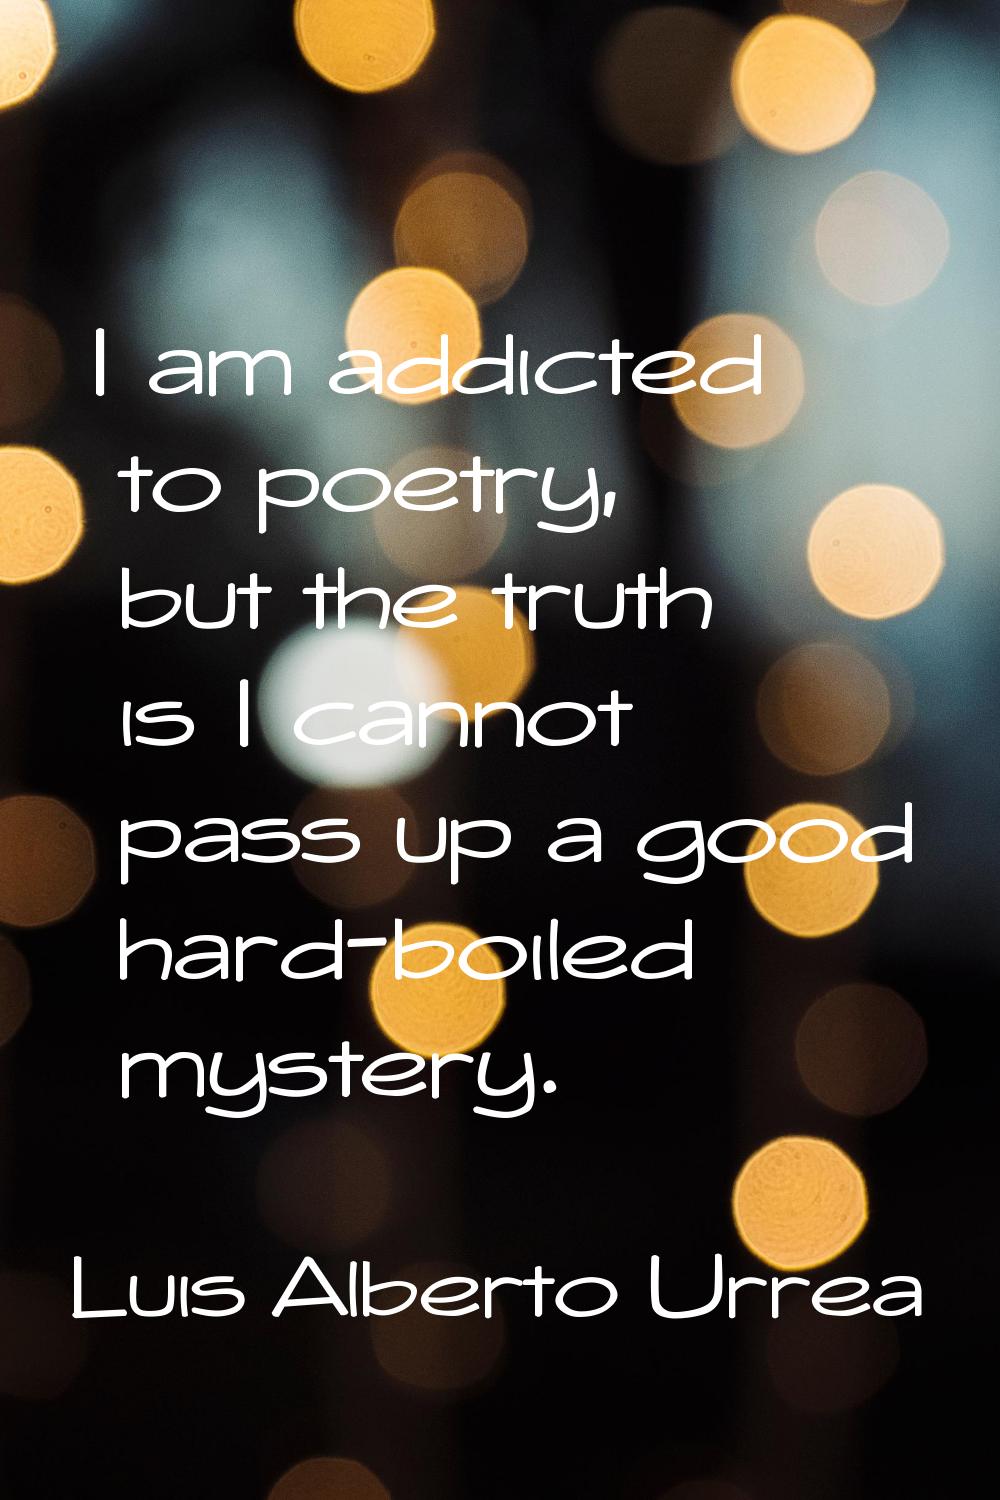 I am addicted to poetry, but the truth is I cannot pass up a good hard-boiled mystery.